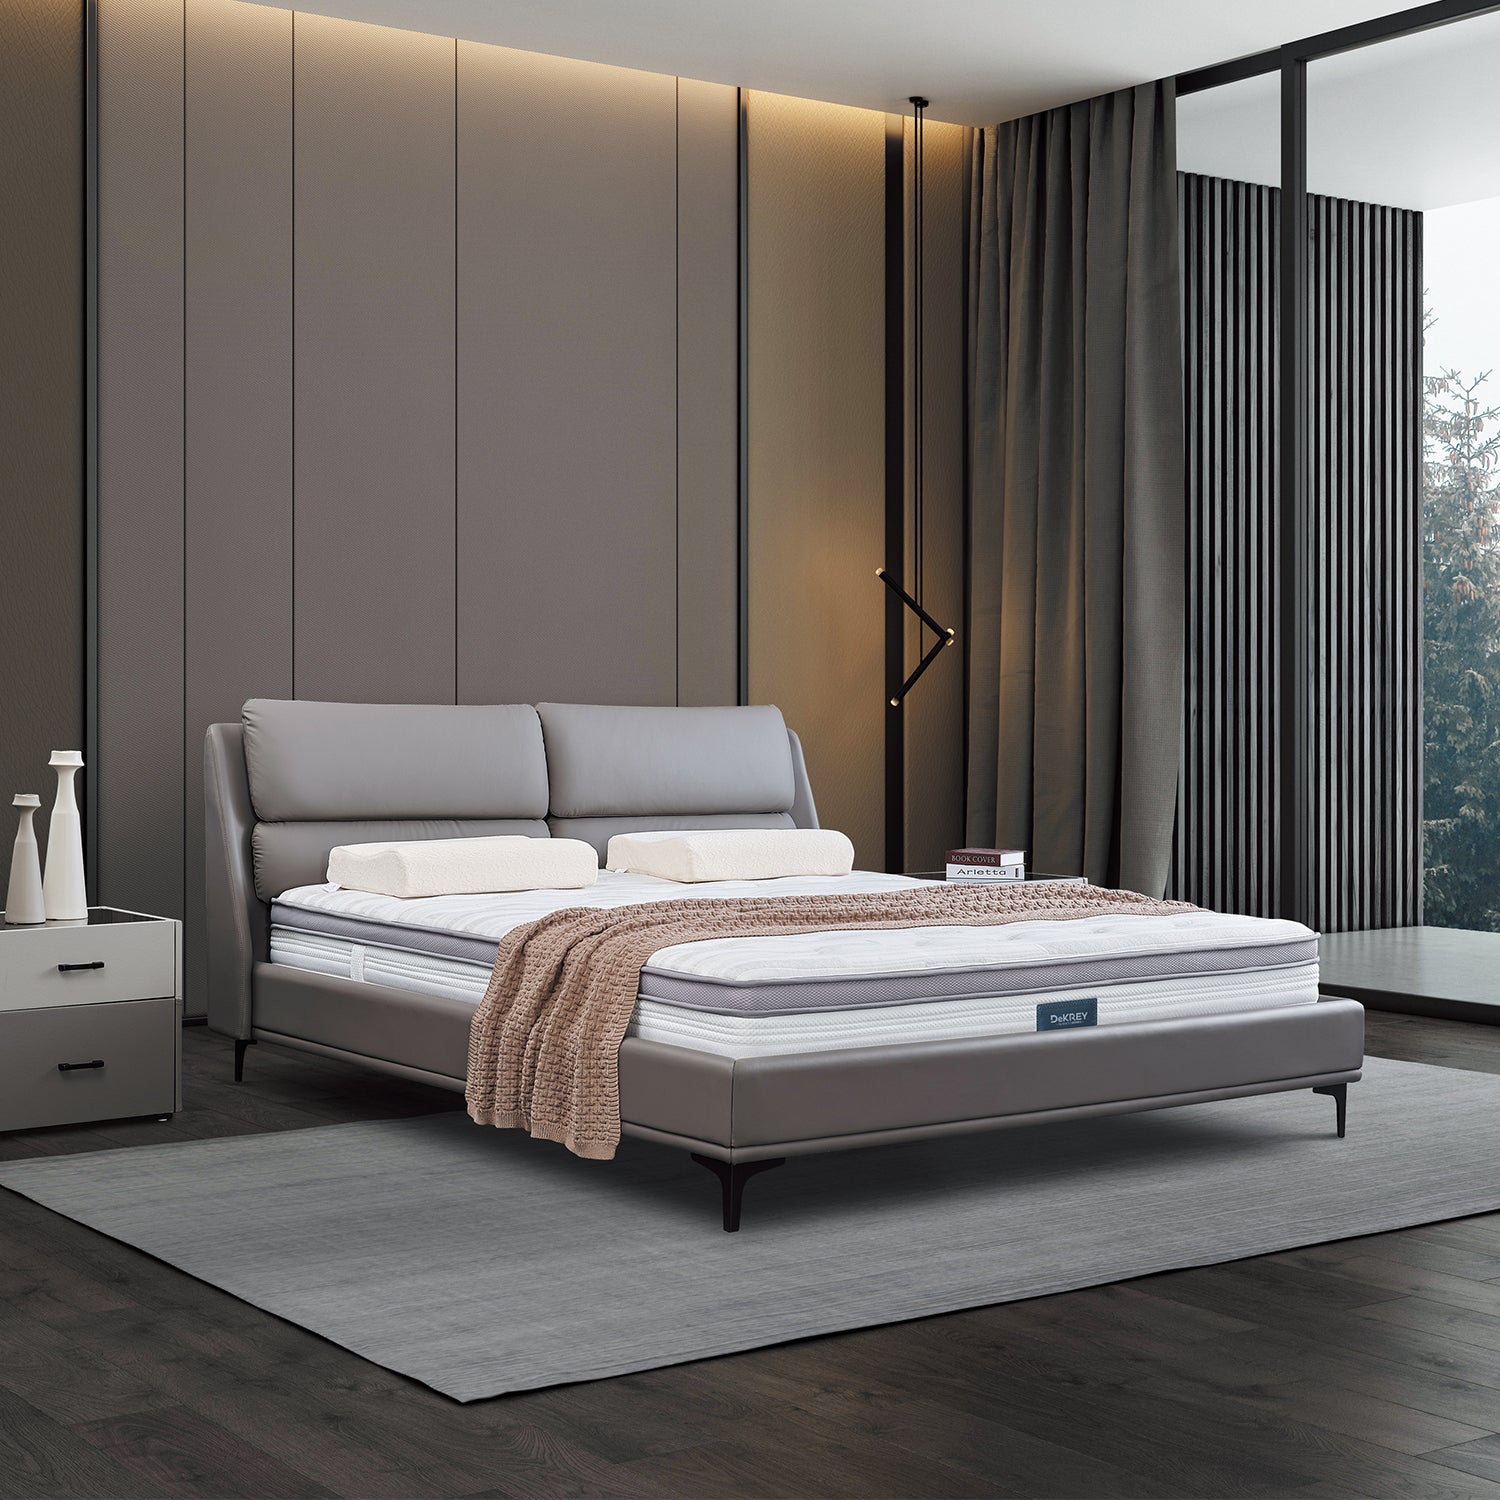 DeRUCCI Bed Frame BOC1-019 in a stylish modern bedroom with grey leather upholstery, white pillows, a white mattress, brown throw blanket, grey area rug, grey accent wall, dark wood floors, and black floor lamp.